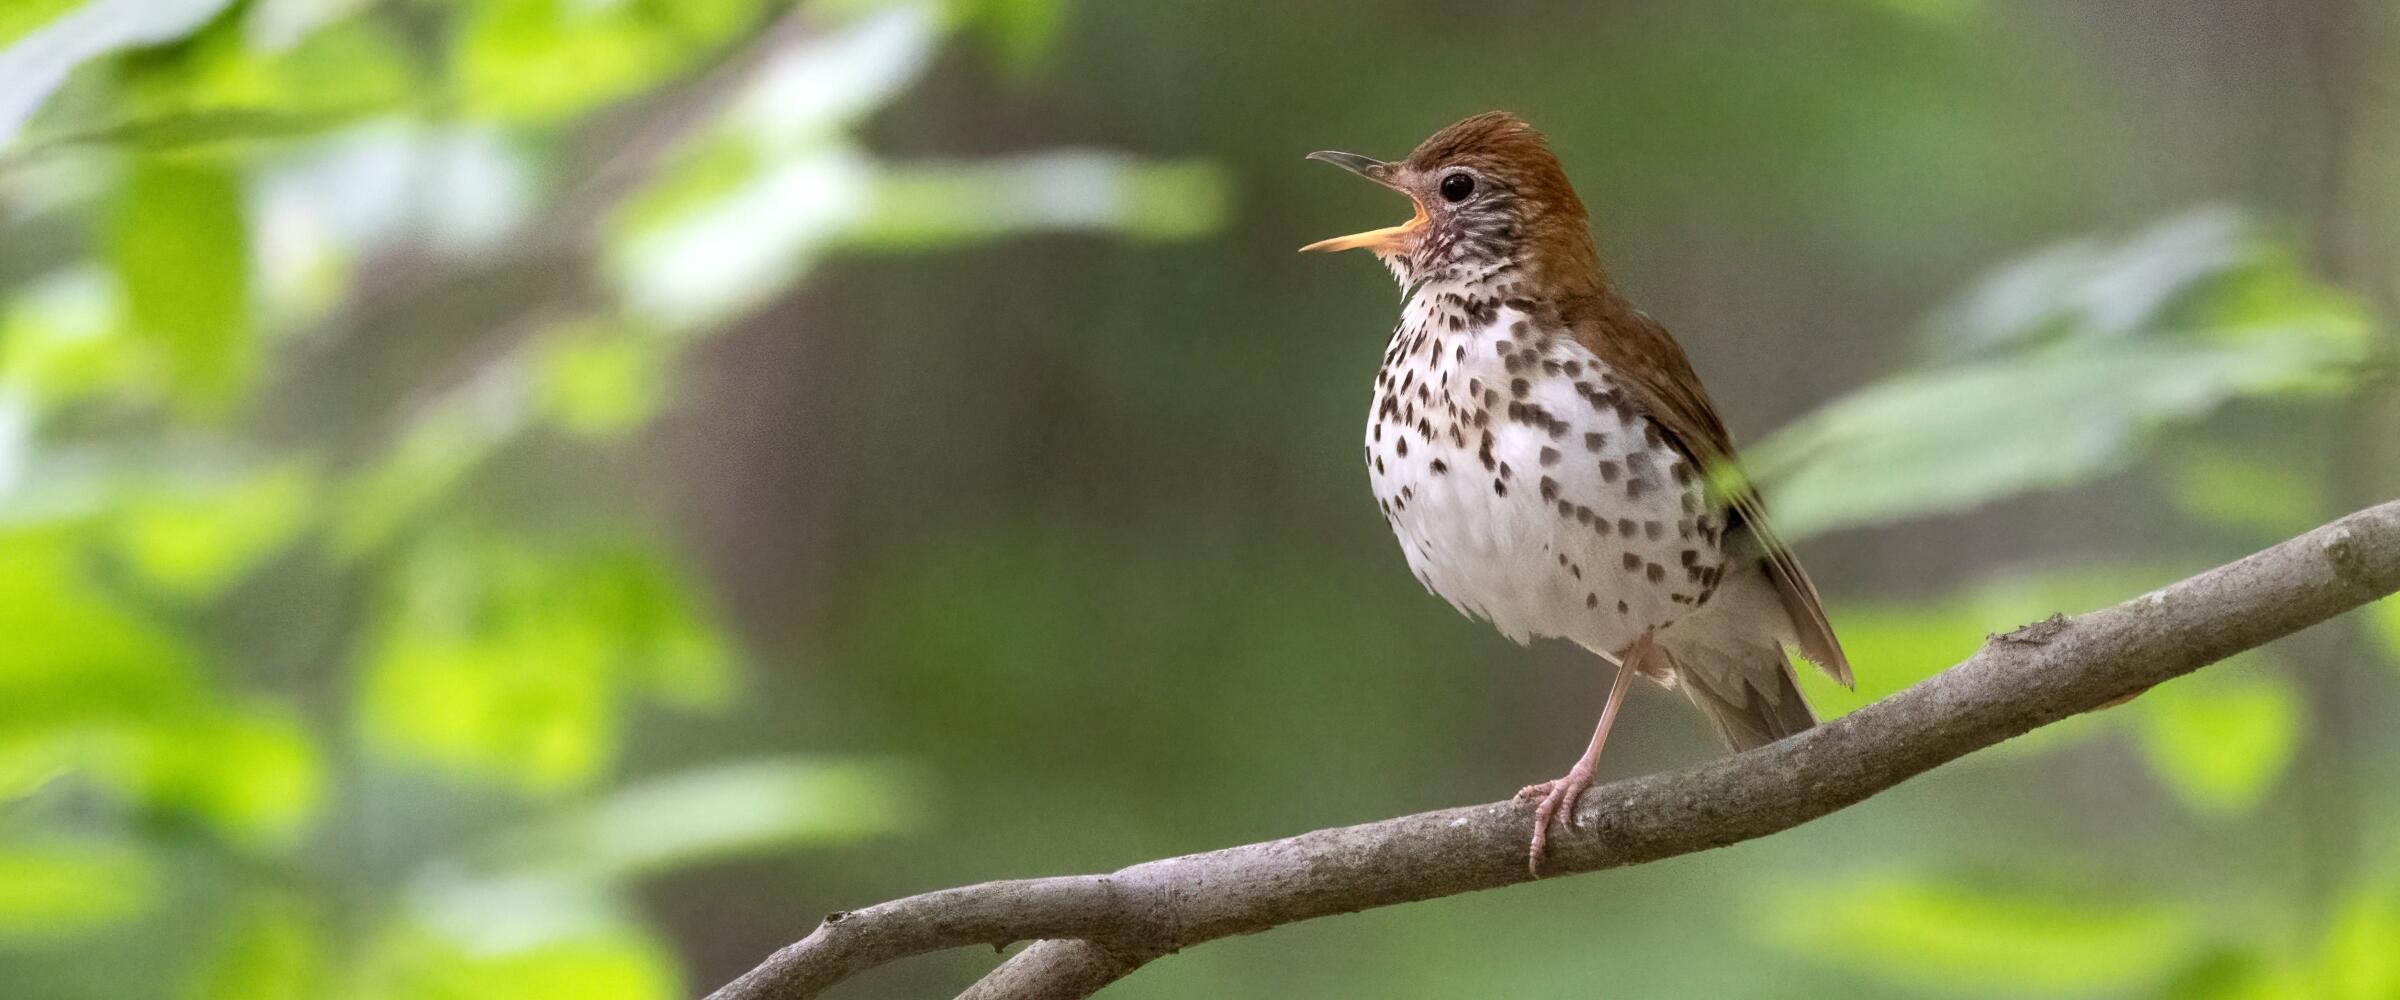 A wood thrush perched on a branch, singing. 